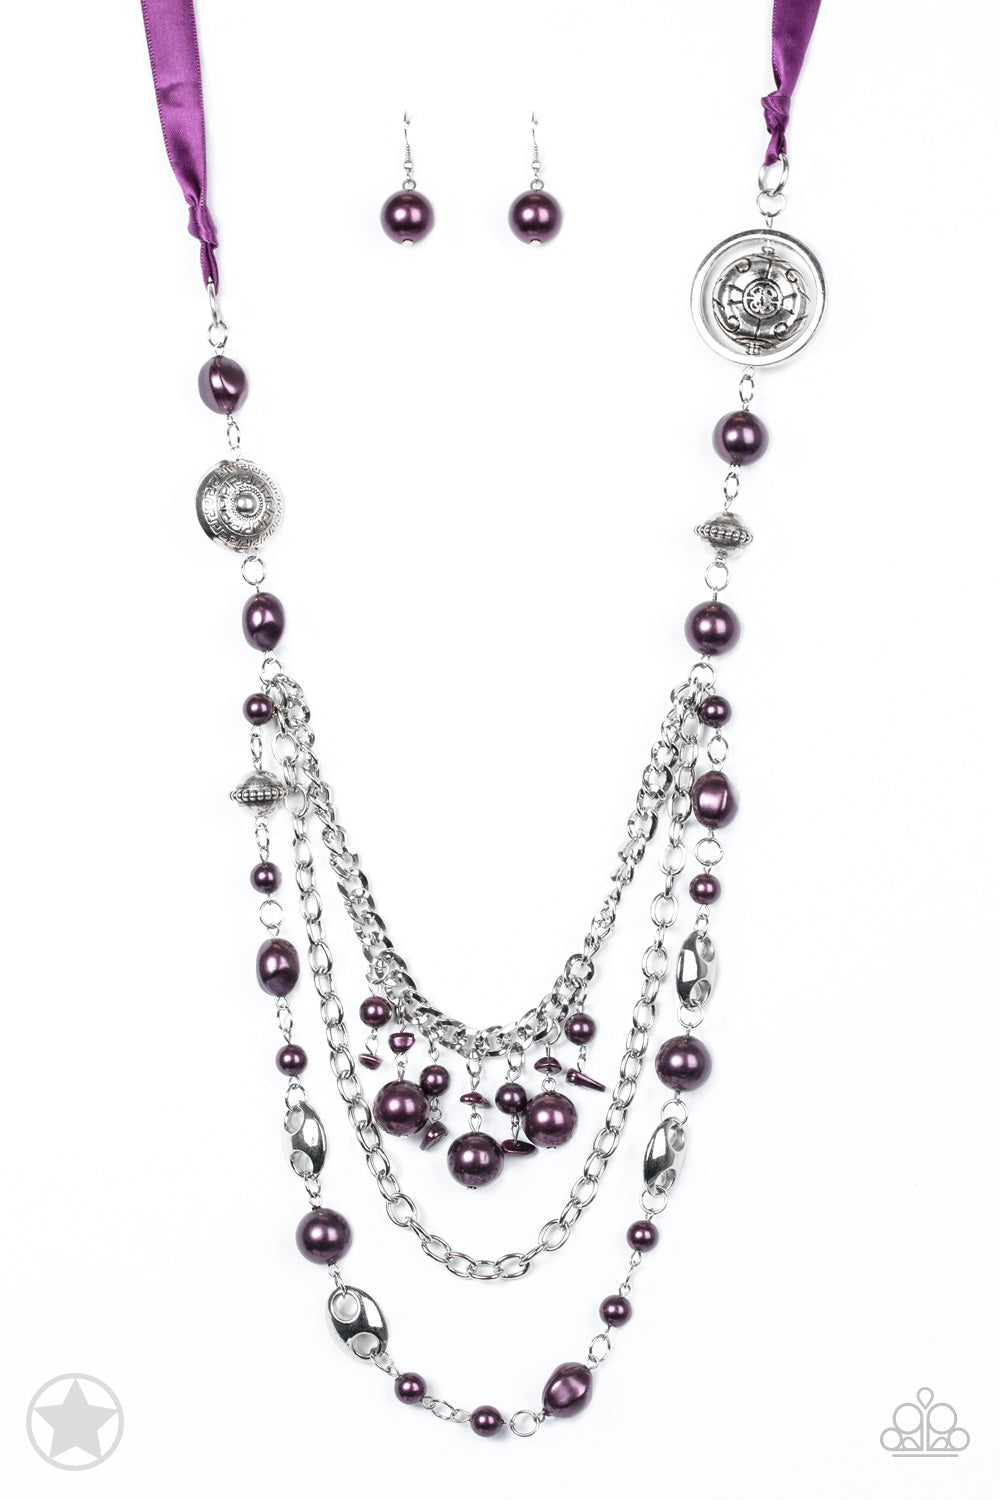 All The Trimmings - Purple and Silver Necklace - Paparazzi Accessories - A silky purple ribbon replaces a traditional chain to create a timeless look. Pearly deep purple beads and funky silver pieces intermix with varying lengths of silver chains to give a fresh take on a Victorian-inspired stylish necklace. Bejeweled Accessories By Kristie - Trendy fashion jewelry for everyone -